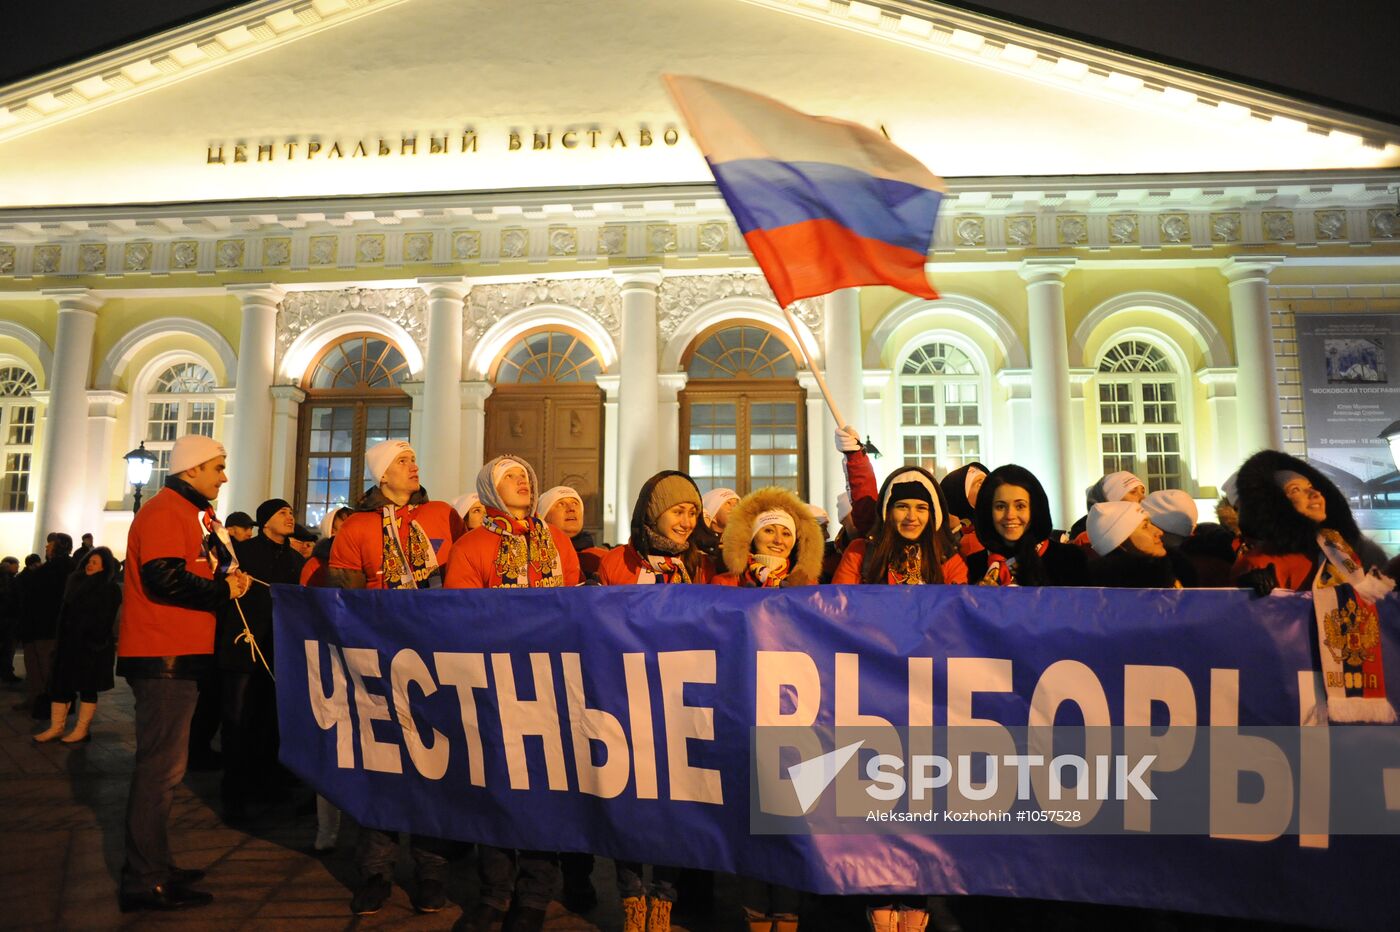 Rally in support of Vladimir Putin on Manezh Square